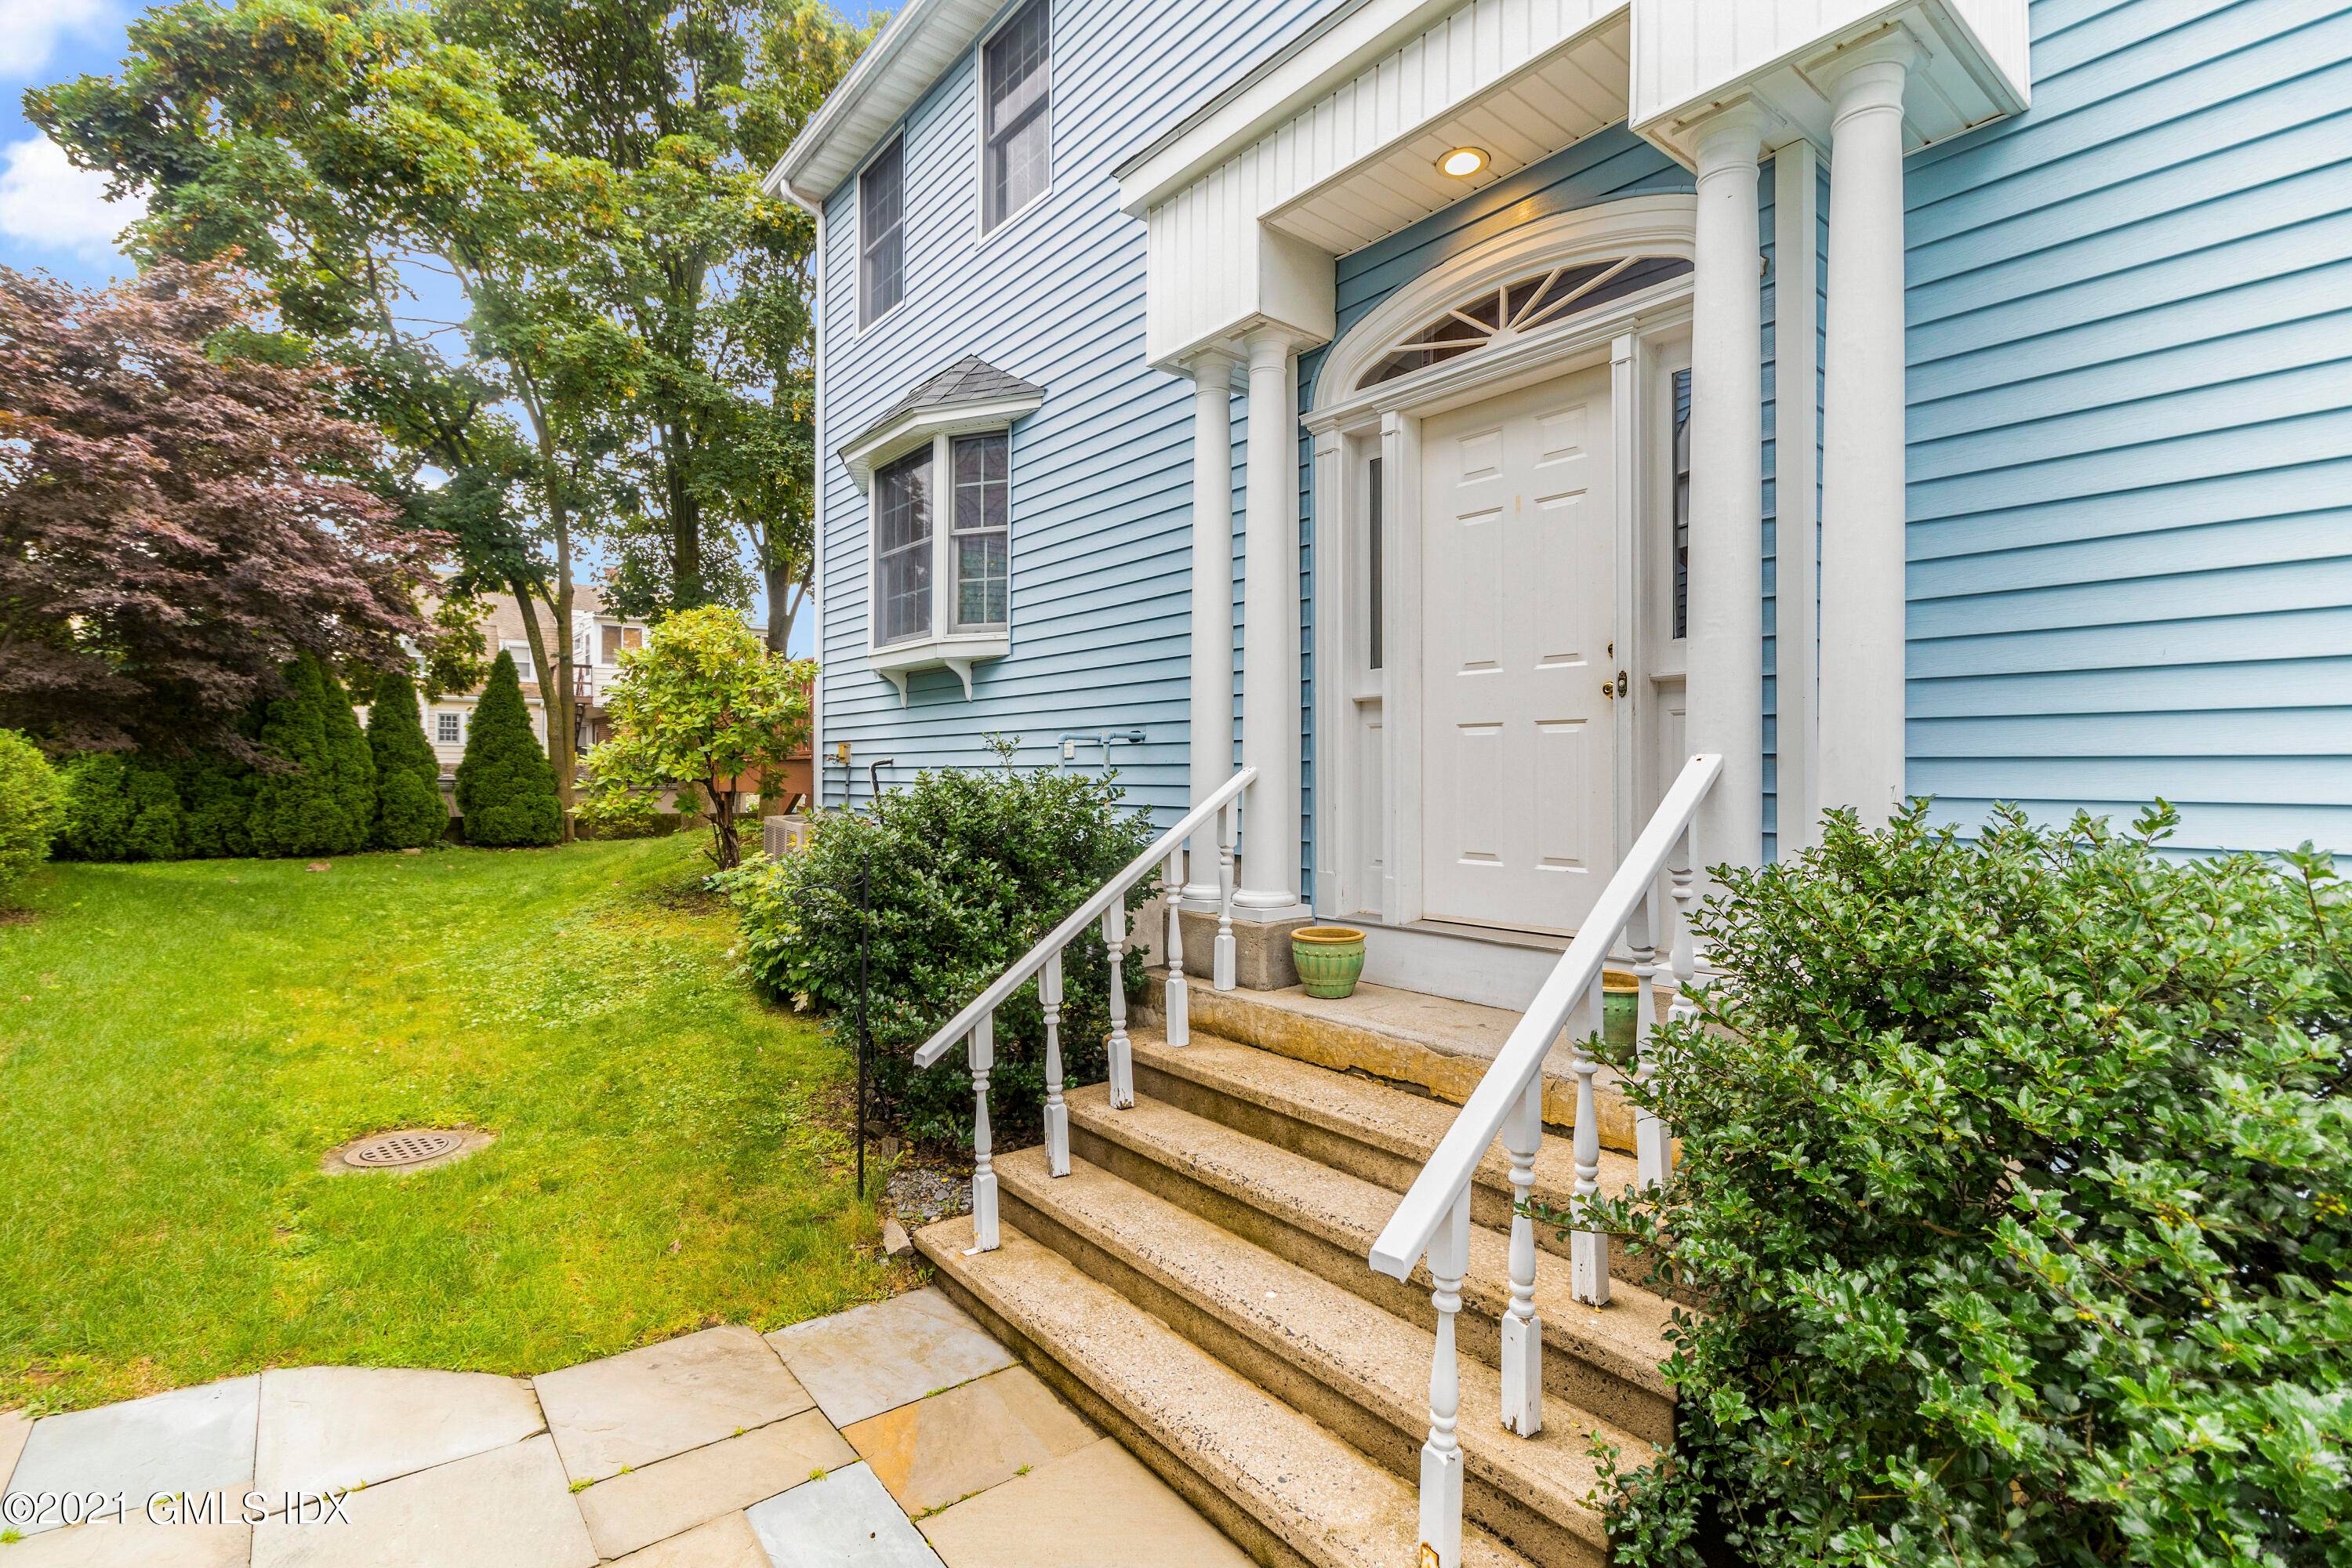 Townhouse close to downtown Greenwich amenities, close to Greenwich Metro North, I 95, and schools.